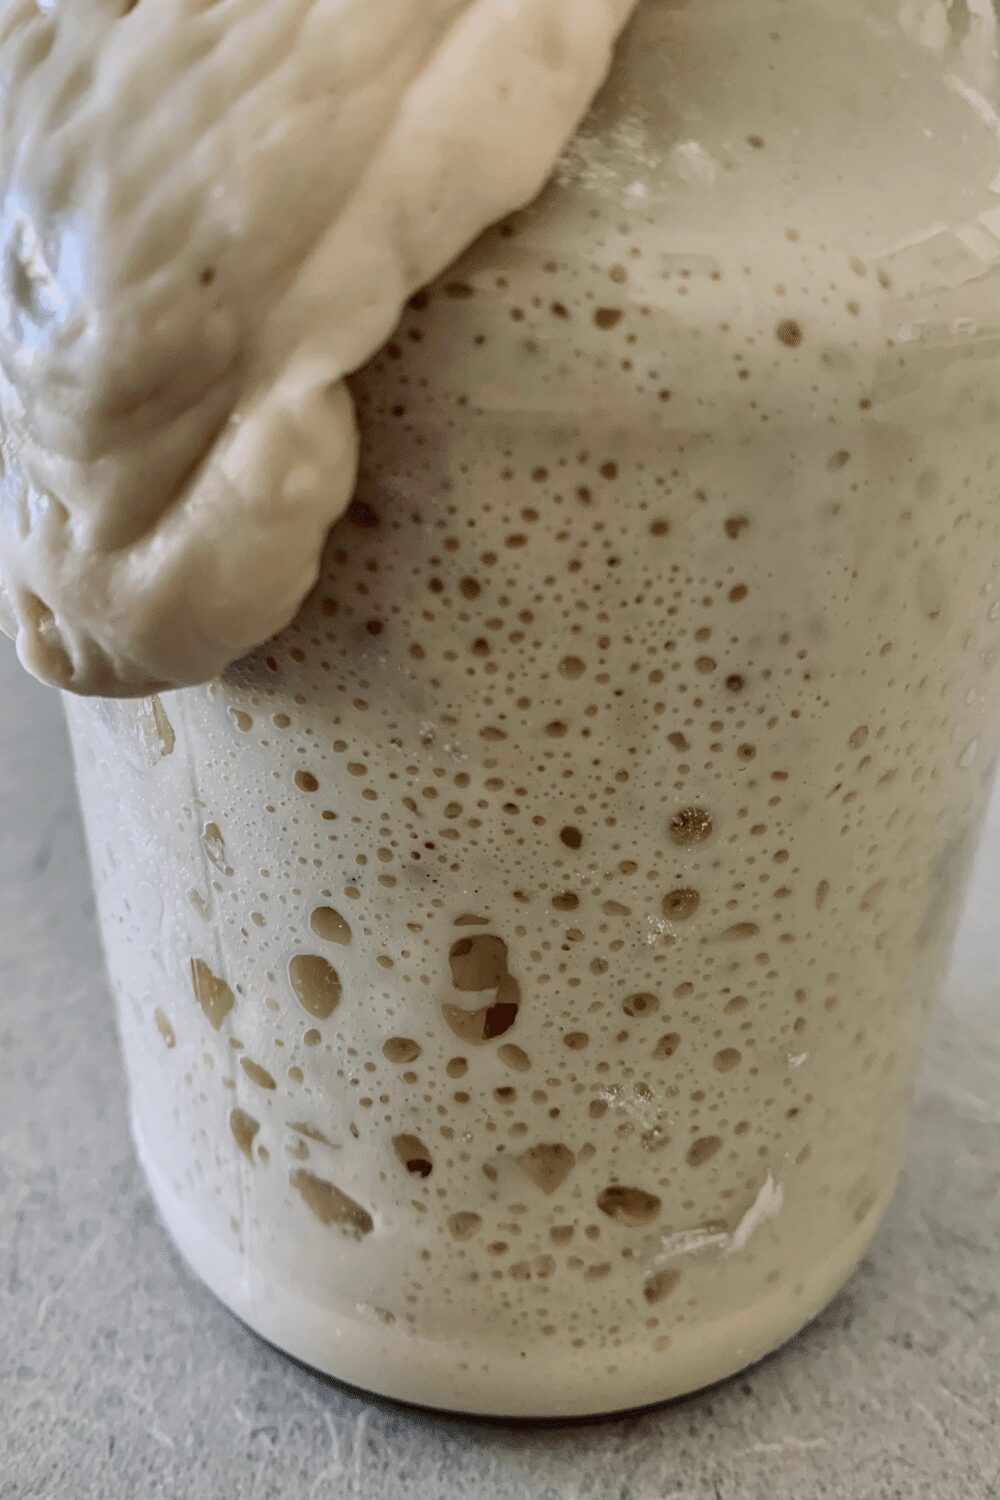 How to Build a Sourdough Starter from Scratch